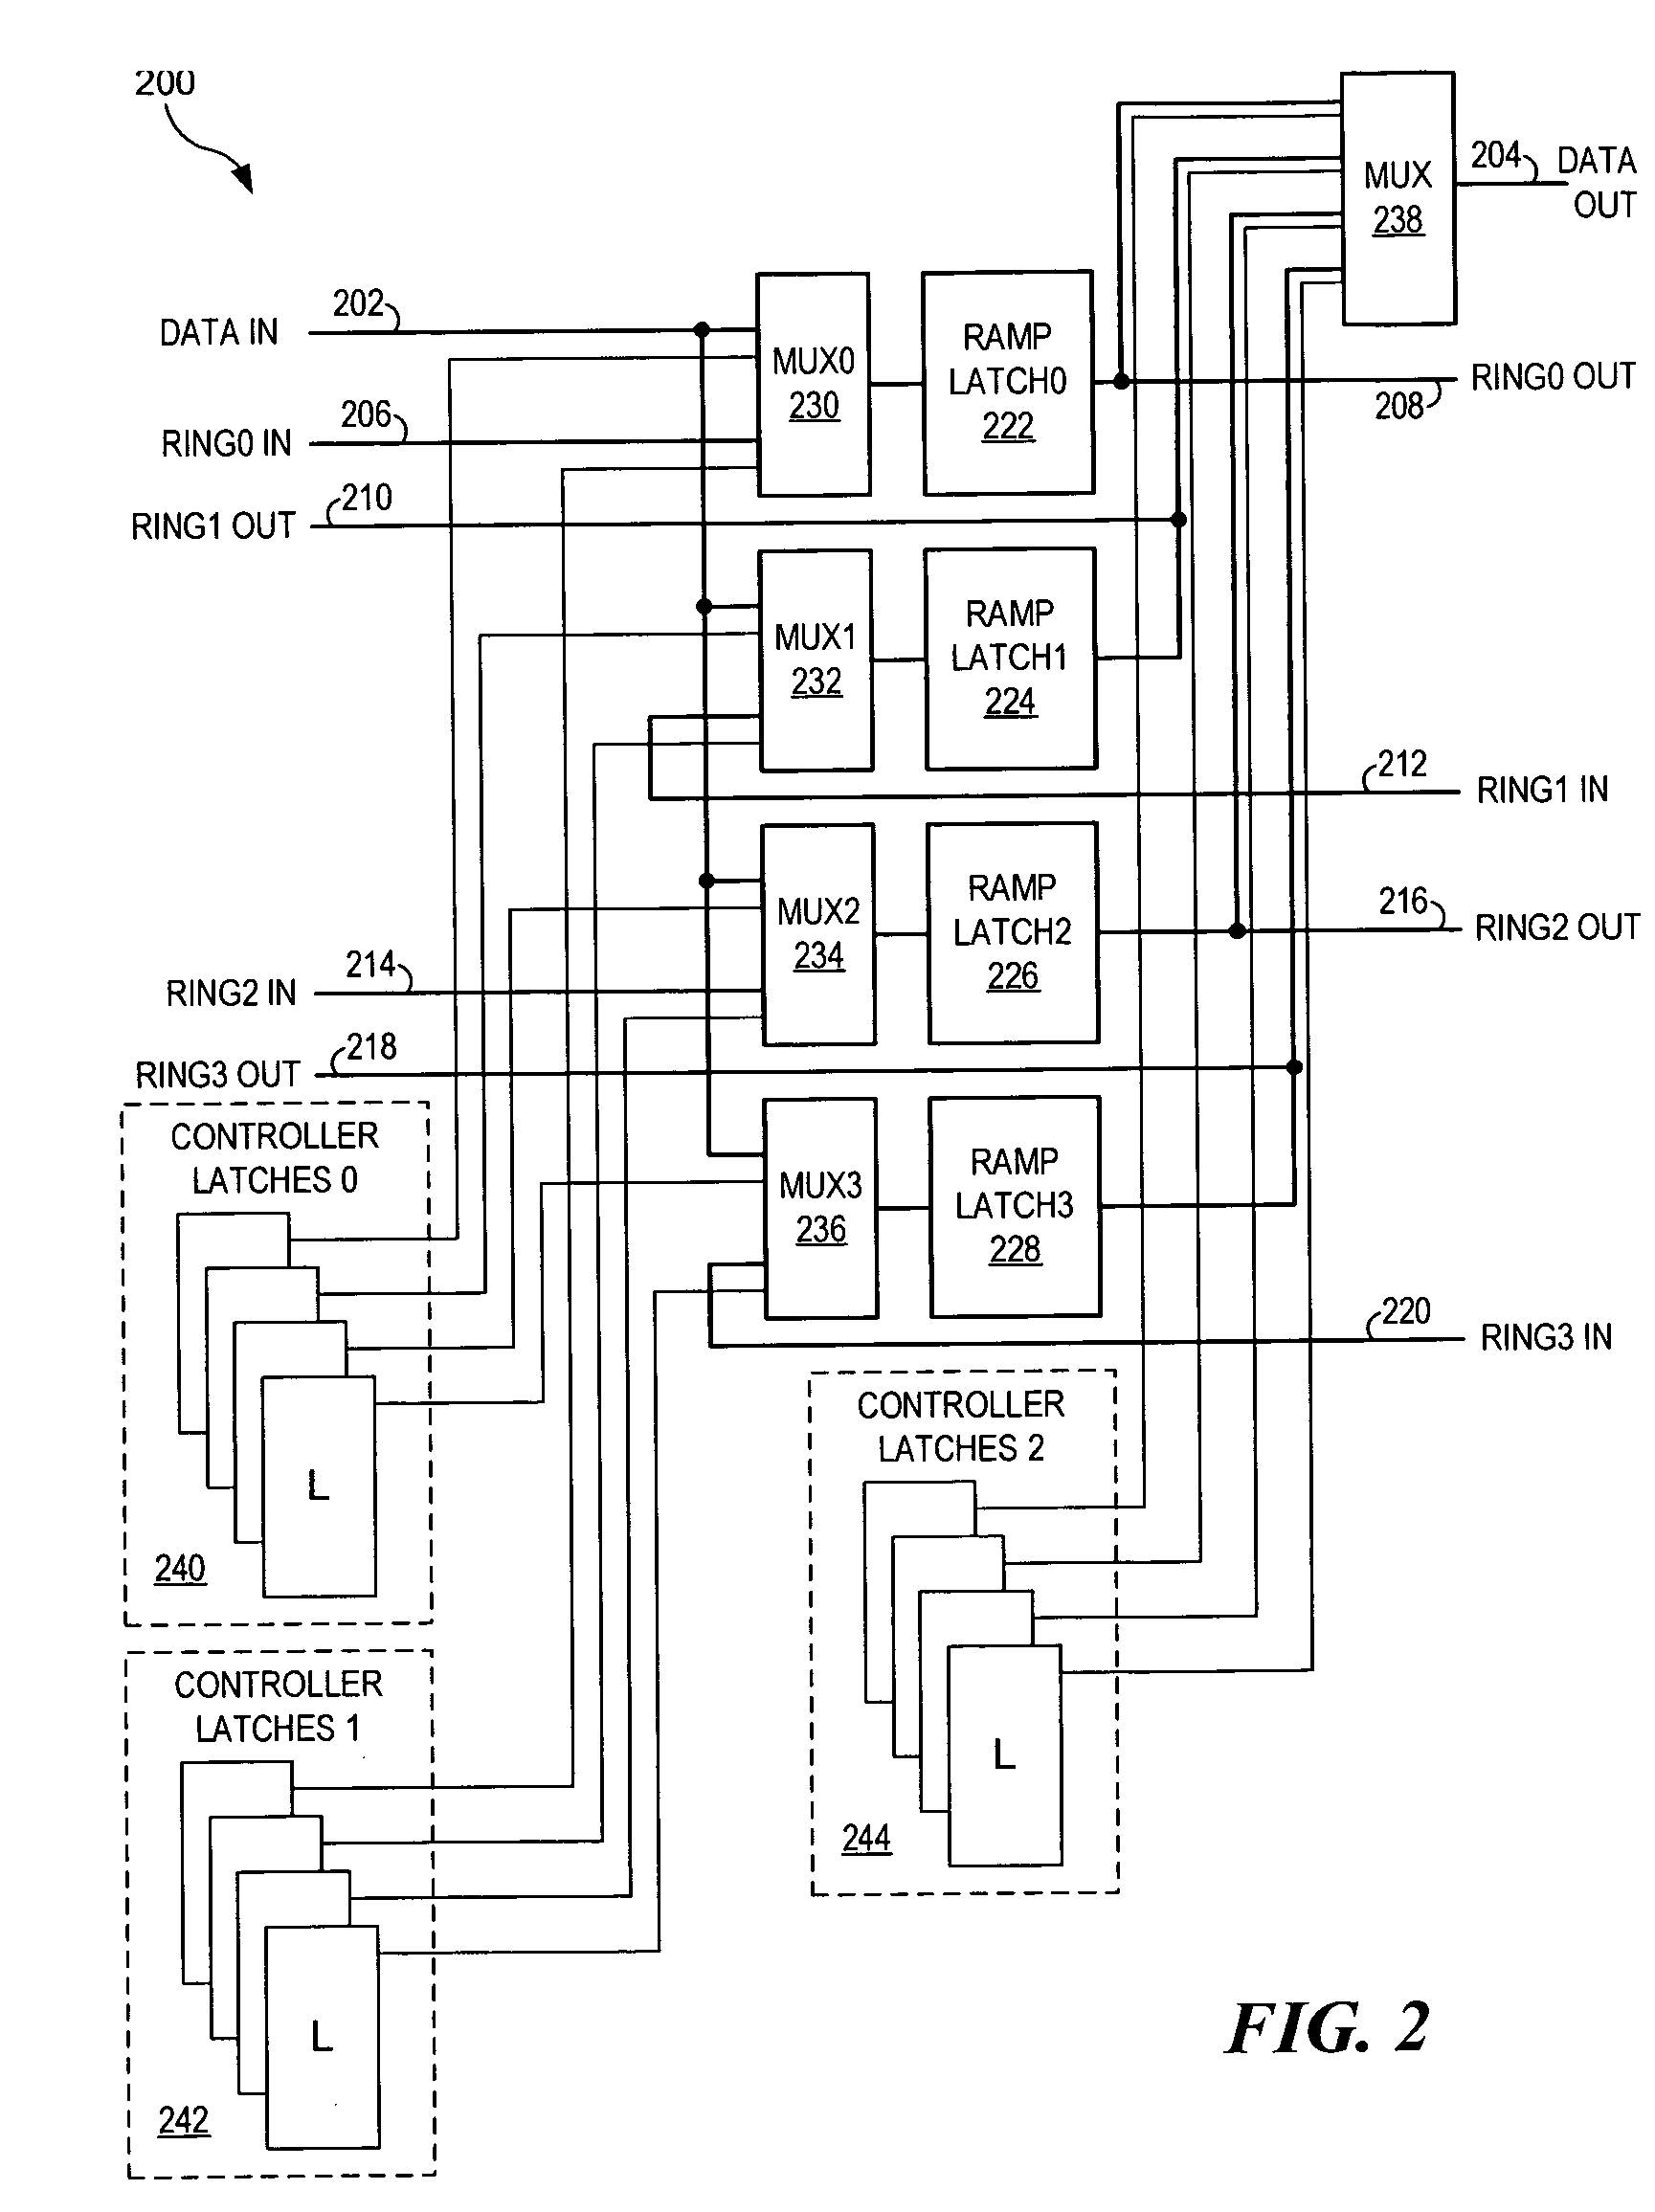 Single port/multiple ring implementation of a hybrid crossbar partially non-blocking data switch